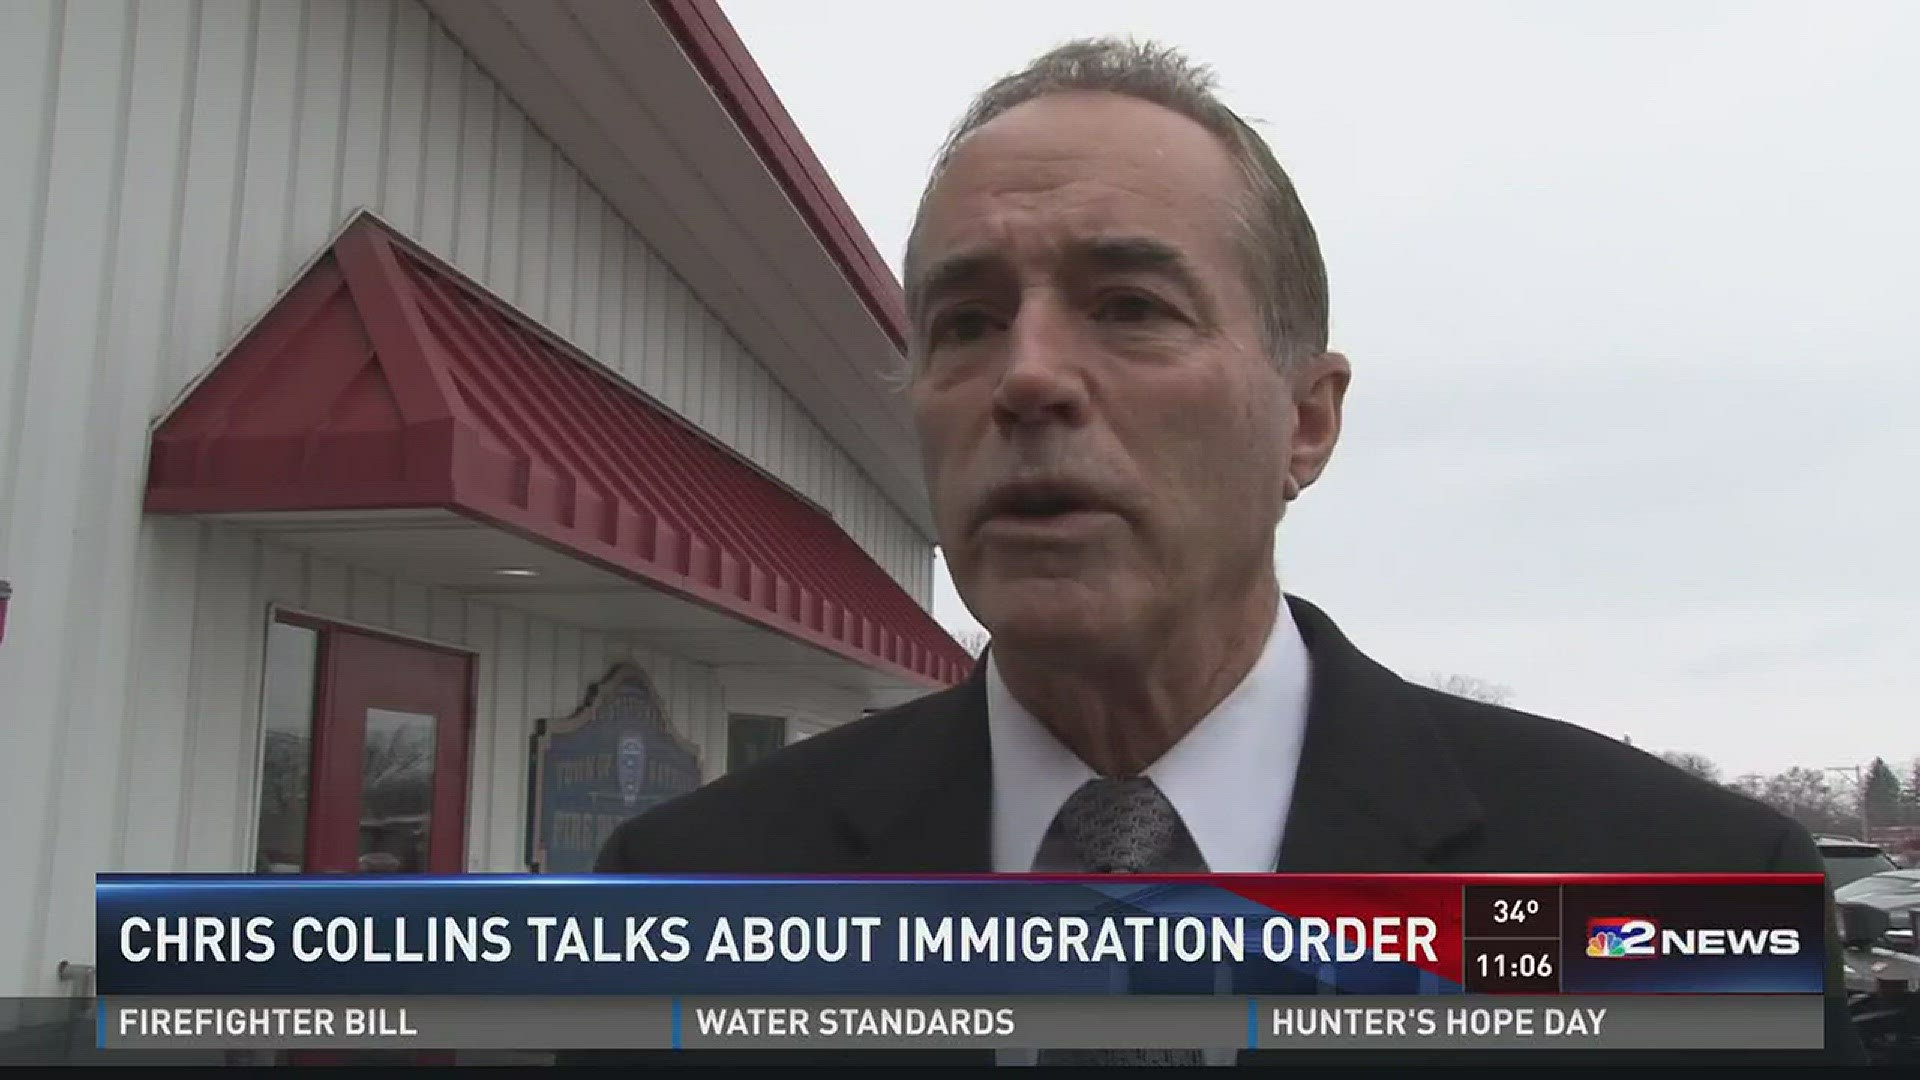 CHRIS COLLINS TALKS ABOUT IMMIGRATION ORDER